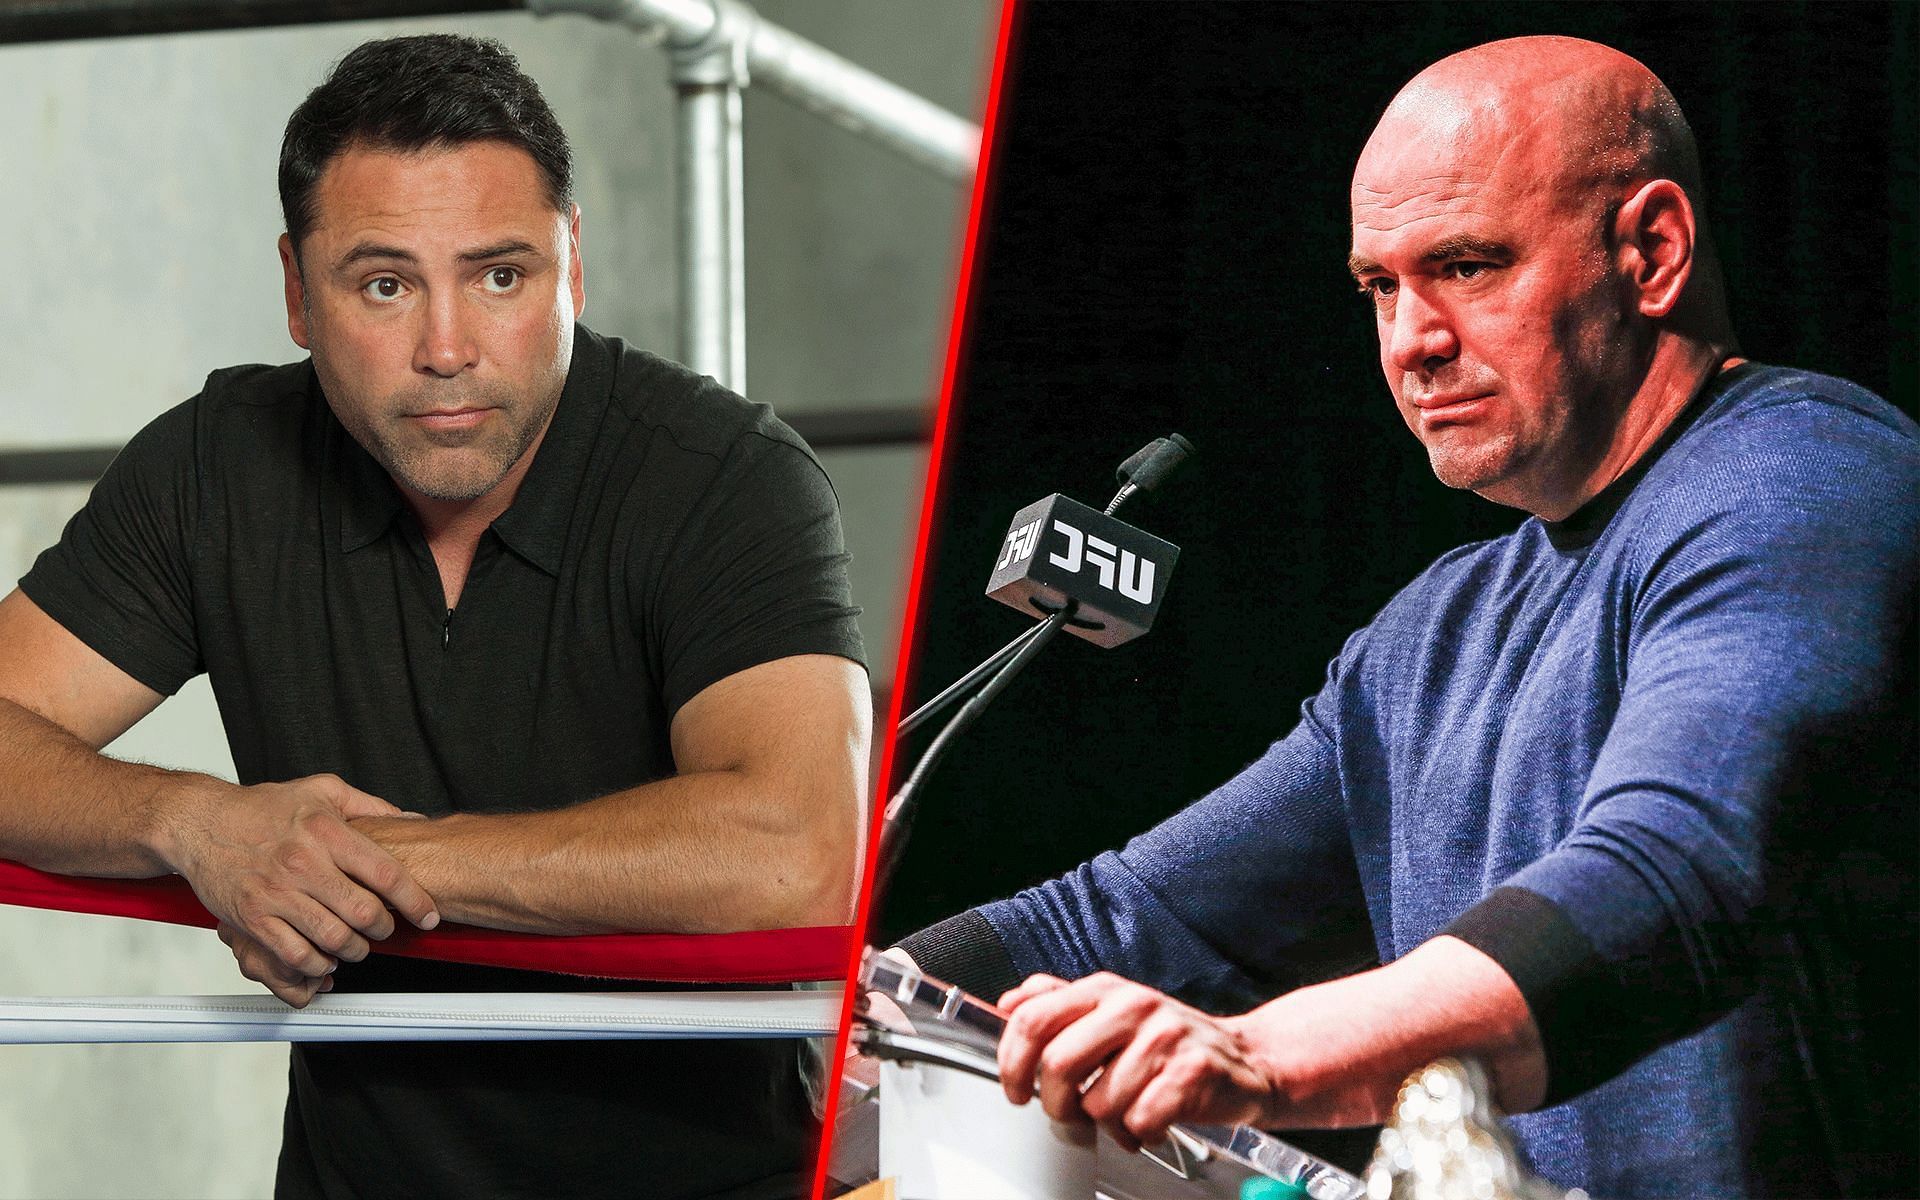 When Oscar De La Hoya (left) wanted to fight Dana White (right) in a boxing match [Images courtesy: Getty]